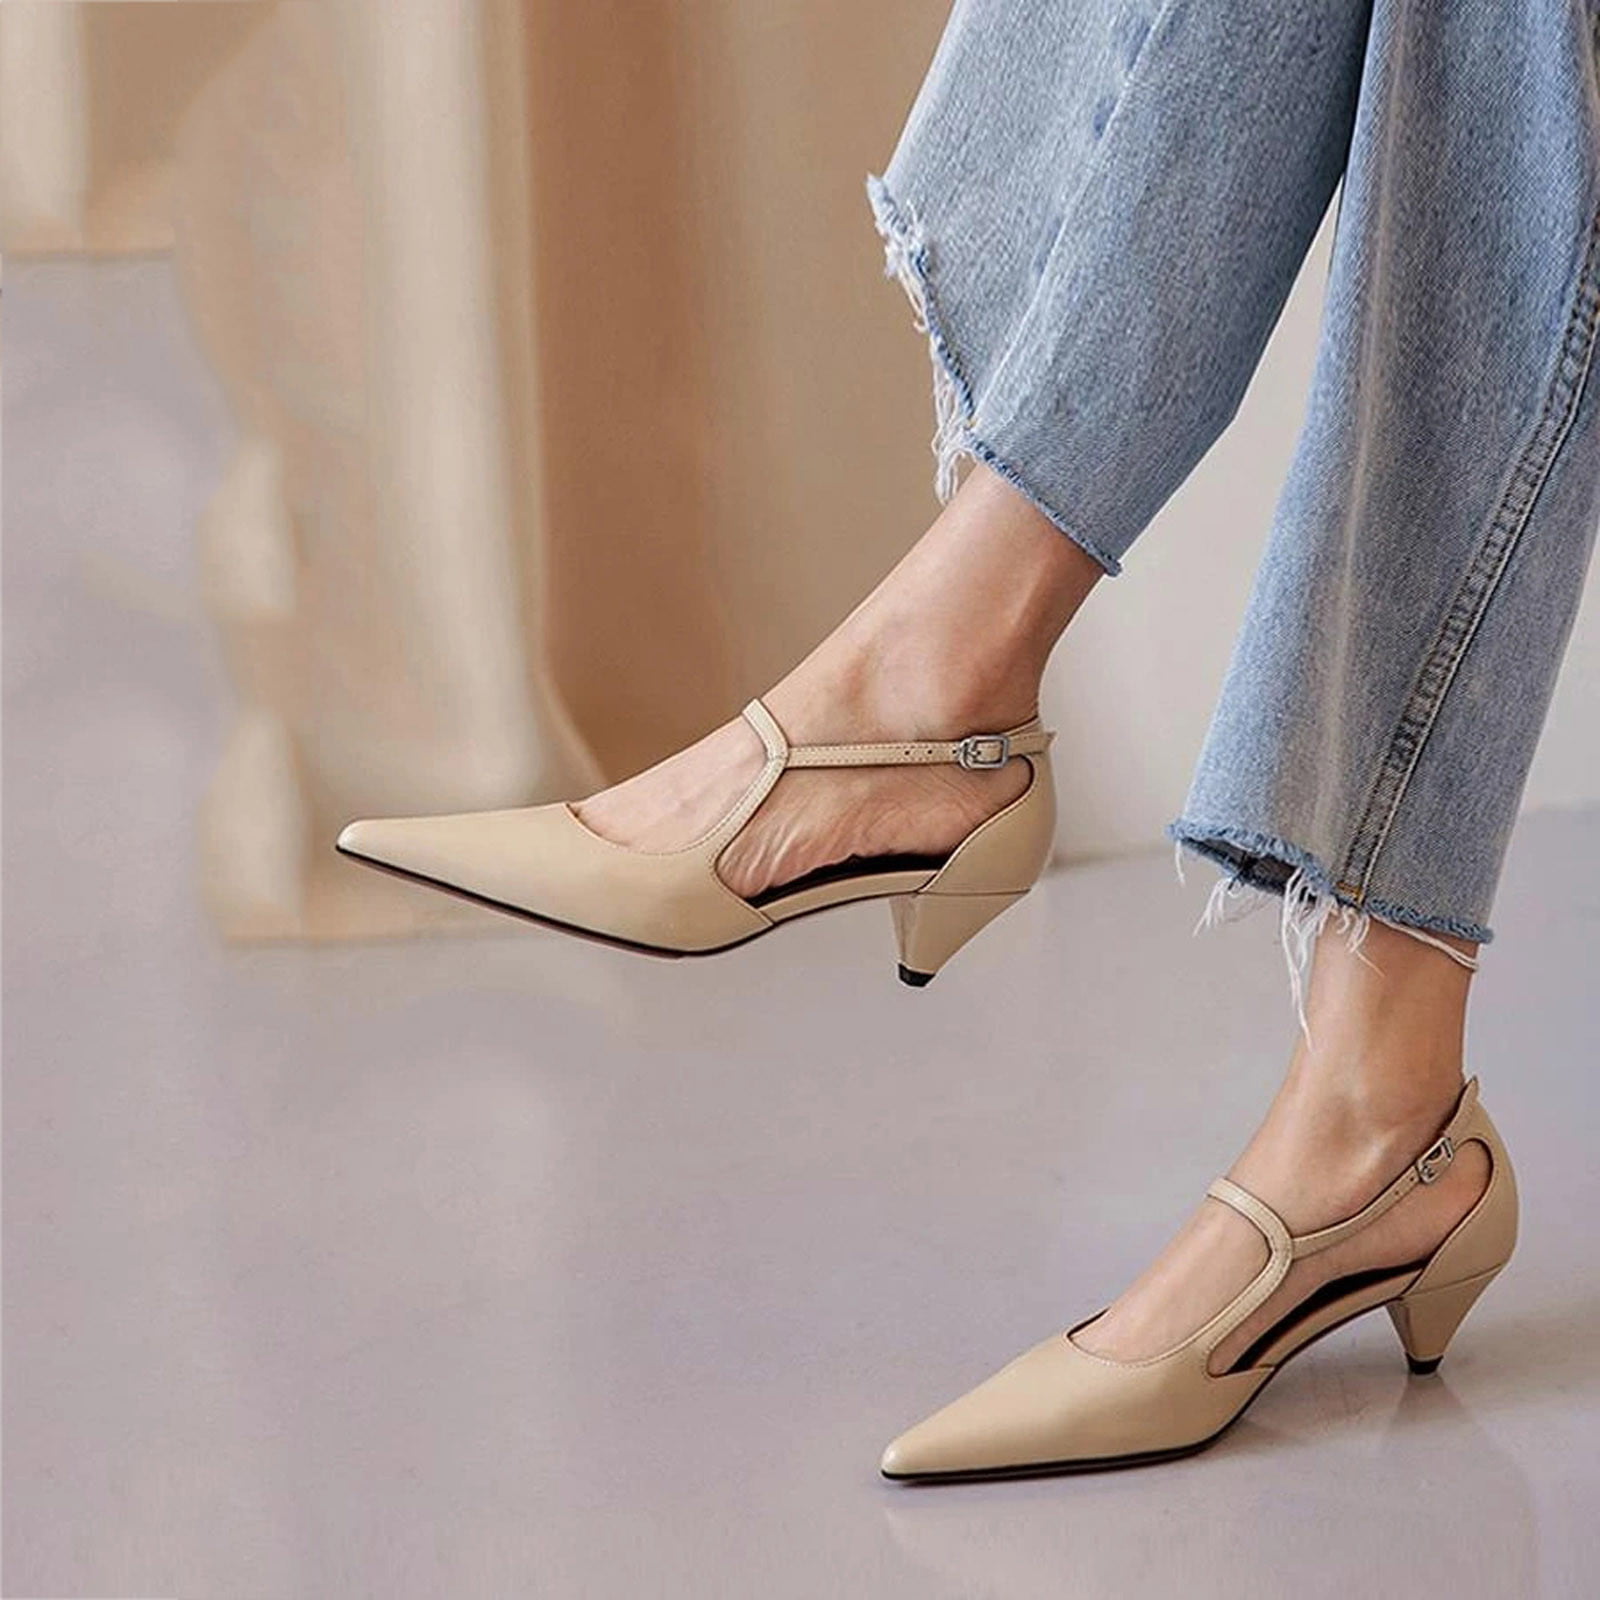 2023 Modern French Style Leather Sandals With Pointed Toe And Shallow Black Pumps  Low Heel Perfect For Parties And Office Wear From Typig, $17.35 | DHgate.Com